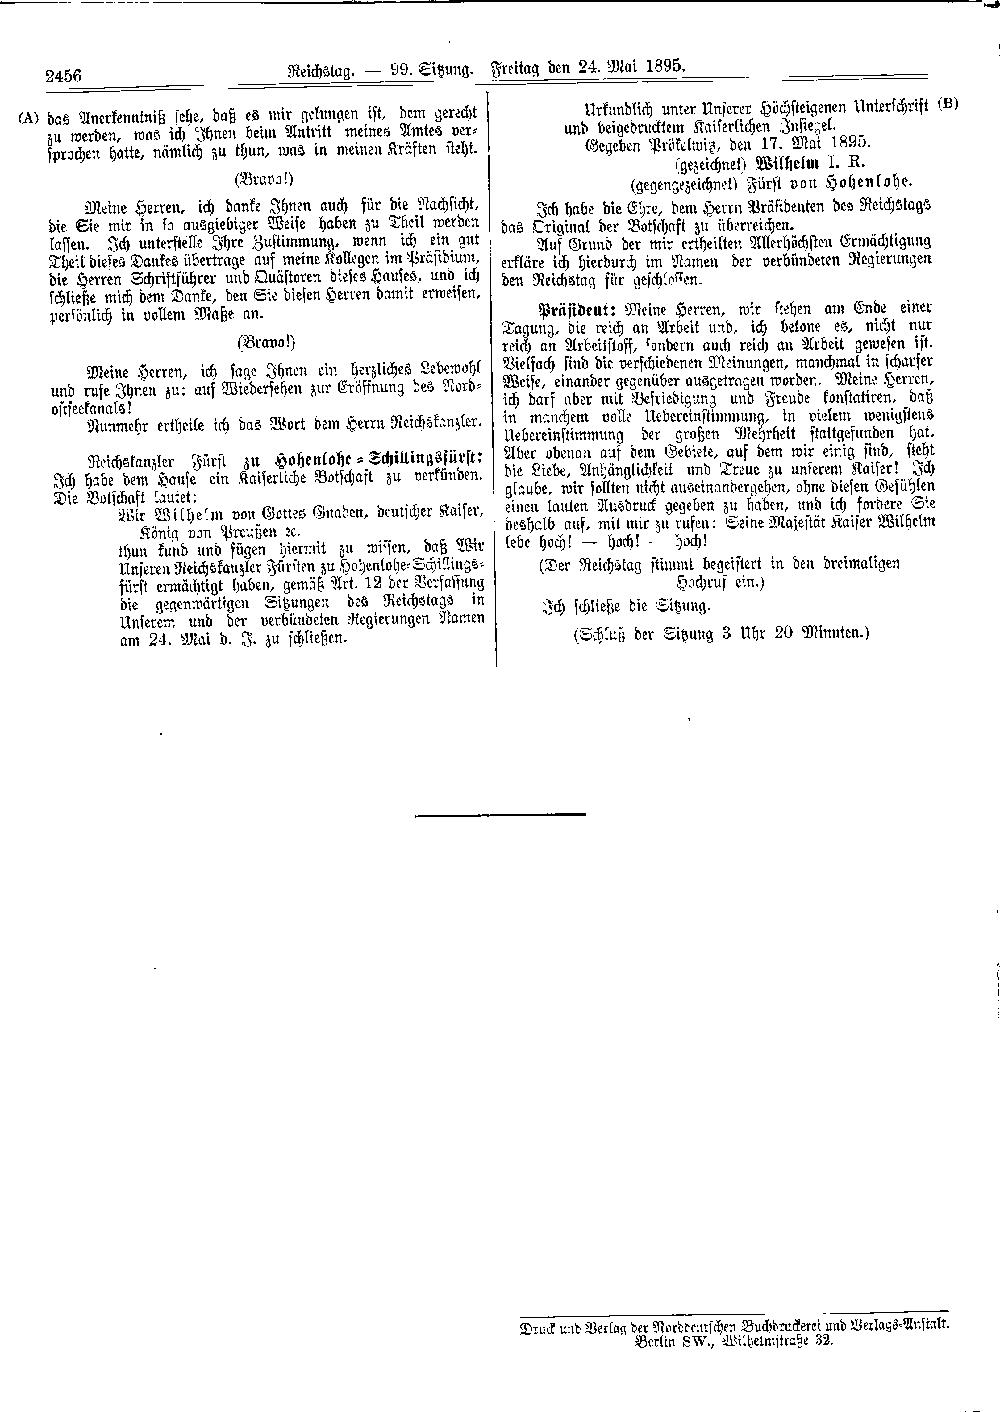 Scan of page 2456